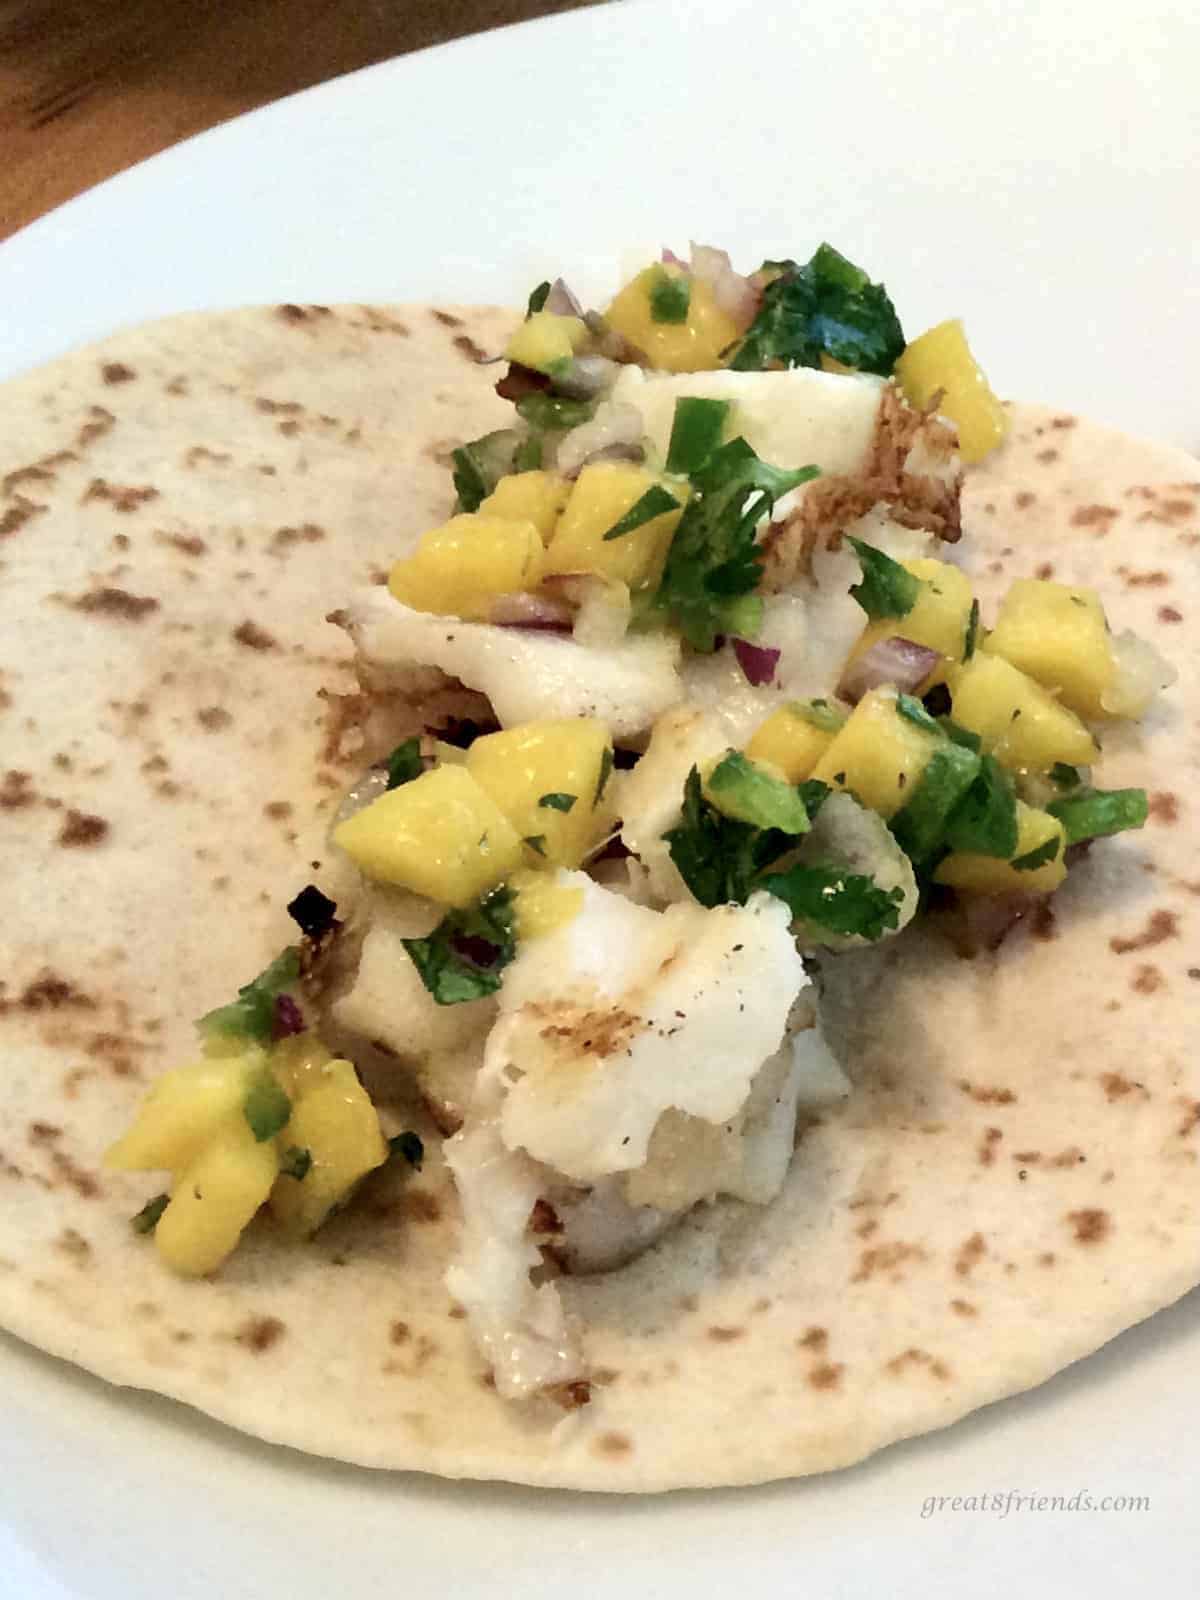 Grilled fish taco with mango topping.